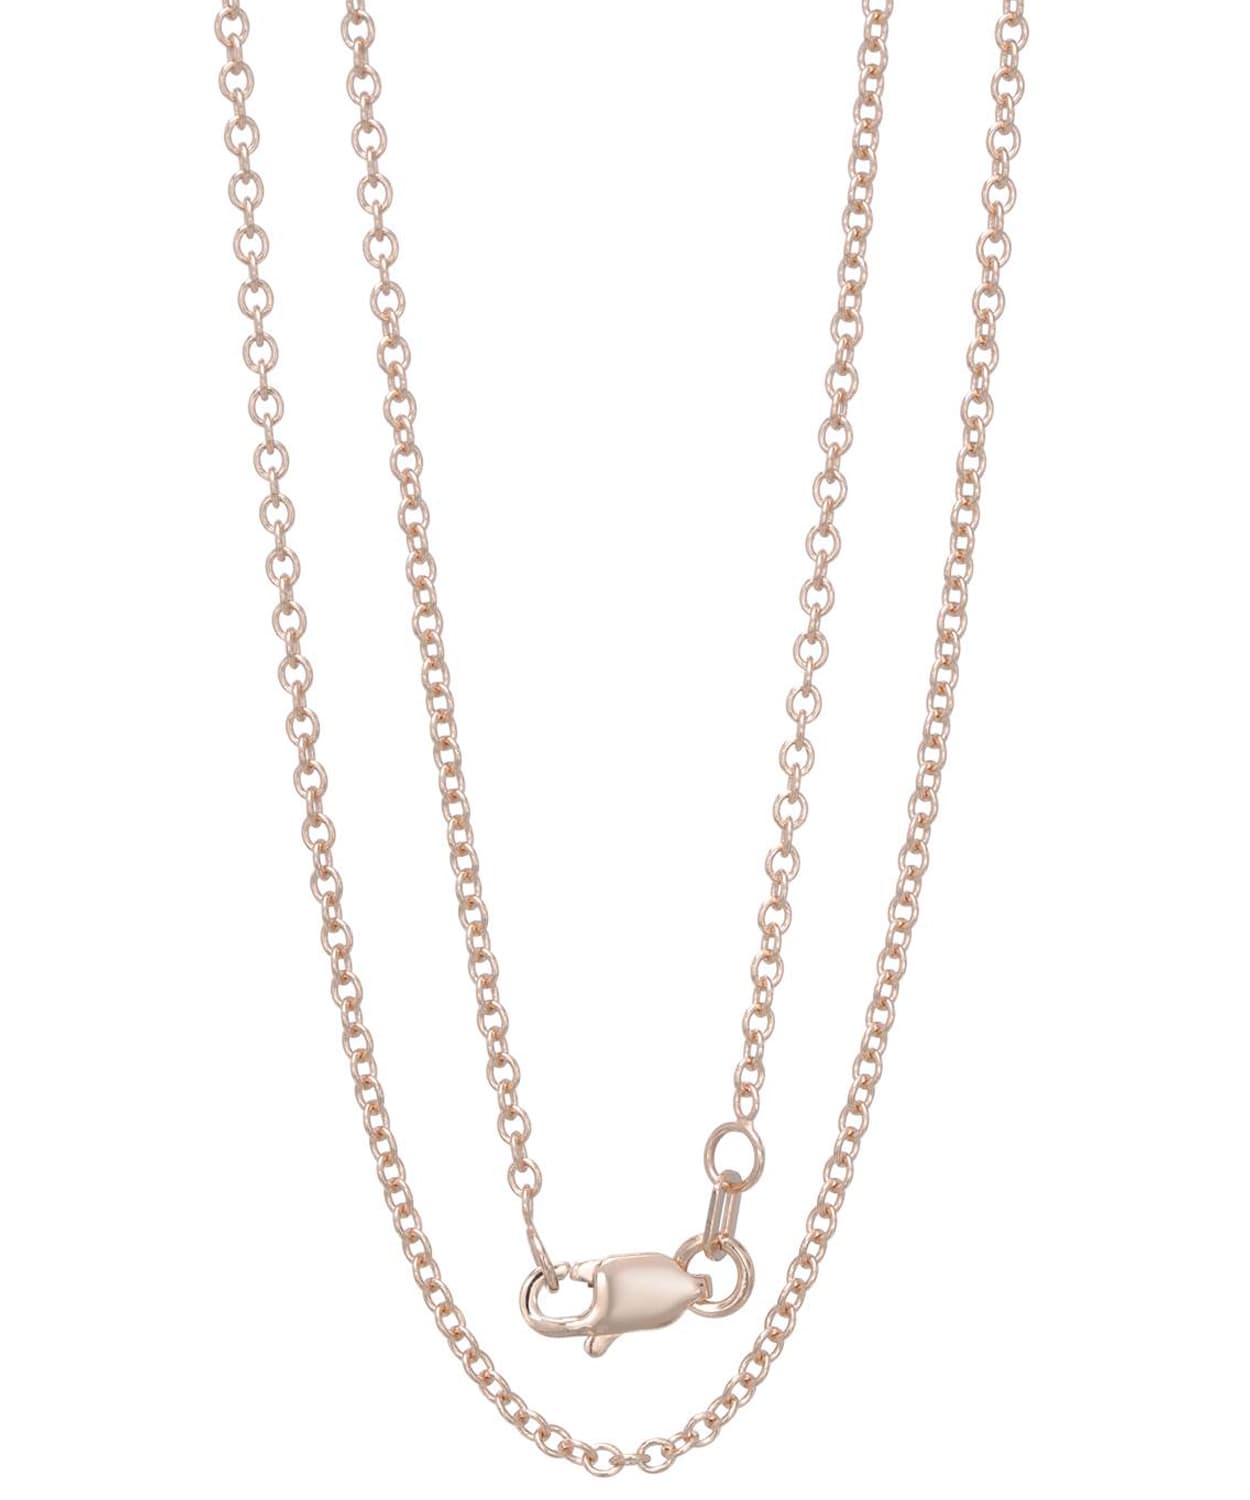 ESEMCO 1.6mm 14K Rose Gold Rolo Chain View 2